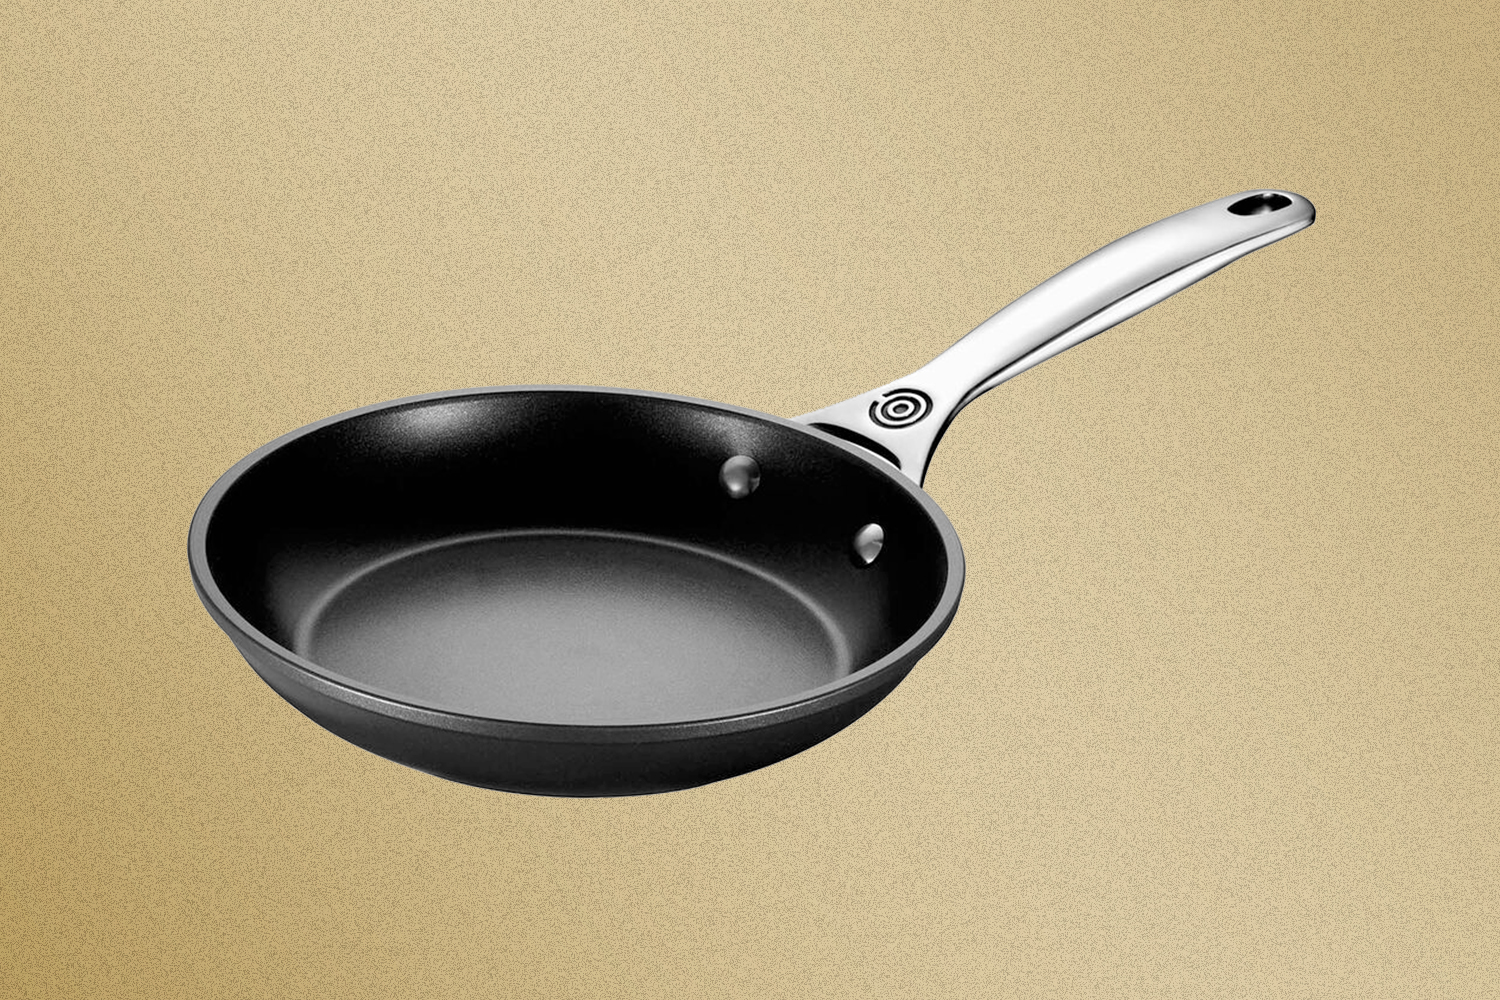 Le Creuset Nonstick Toughened Pro Cookware Is Up to 40% Off